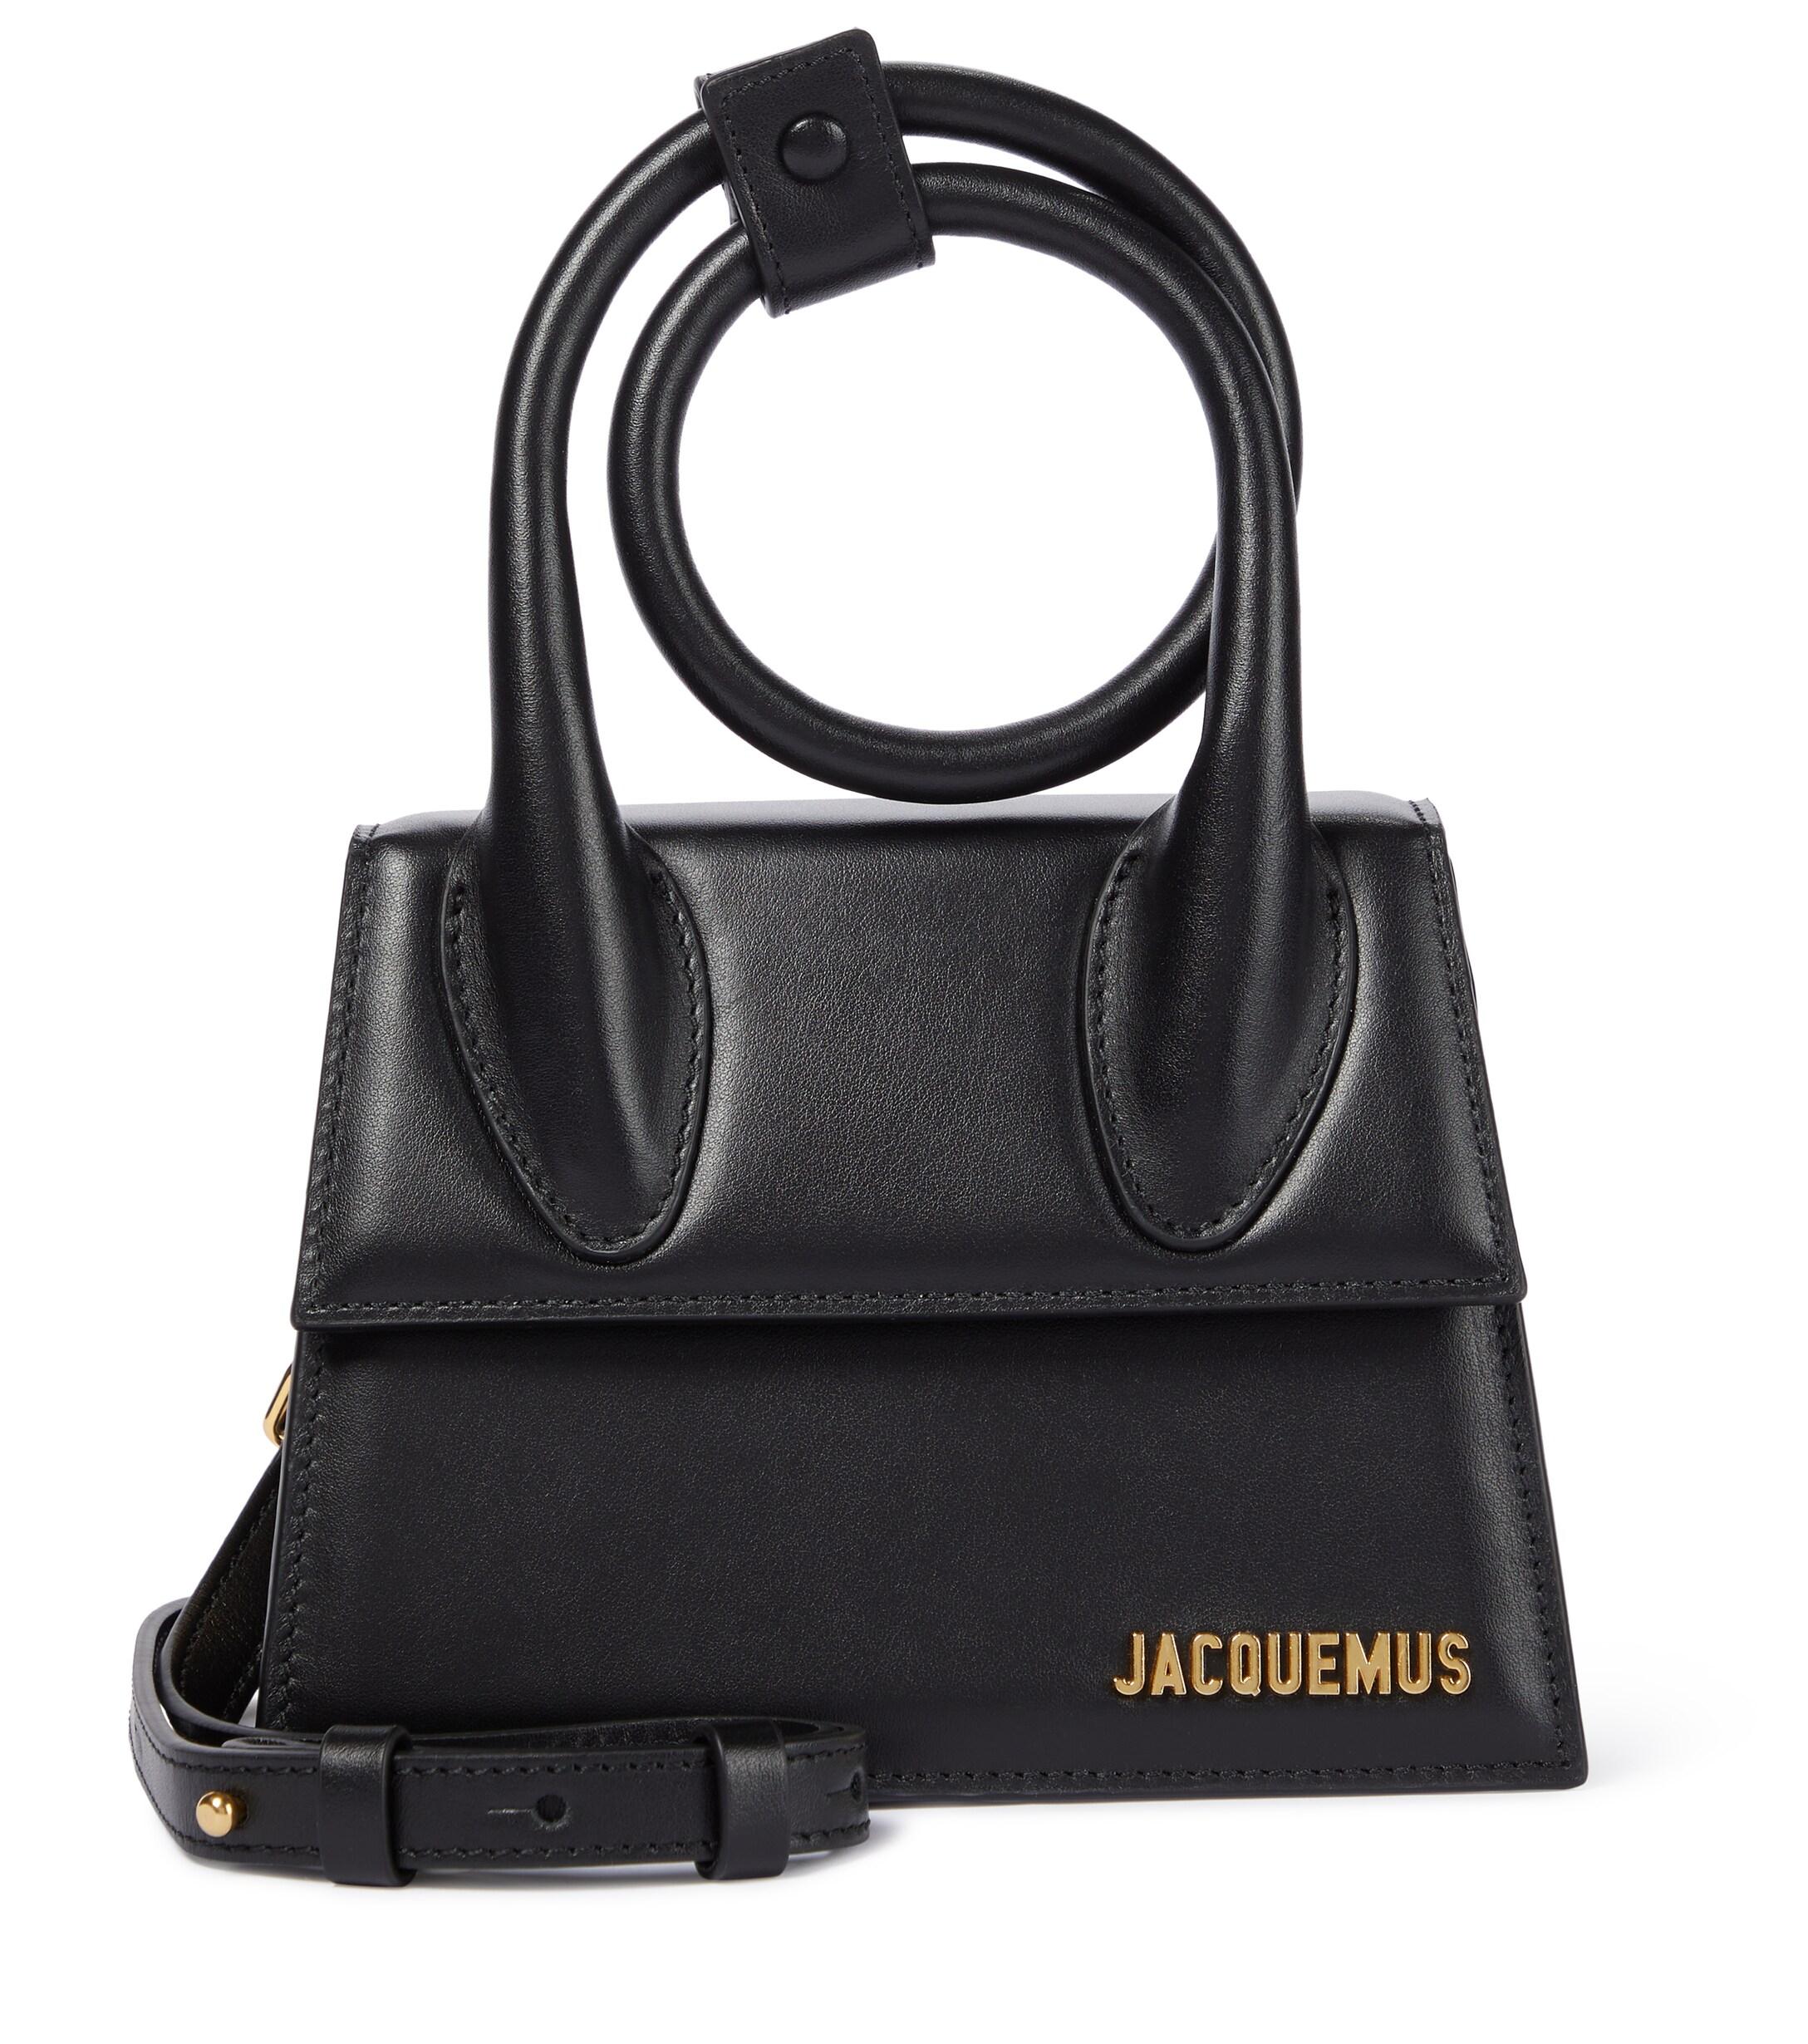 Jacquemus Le Chiquito Noeud Leather Tote in Black | Lyst Canada